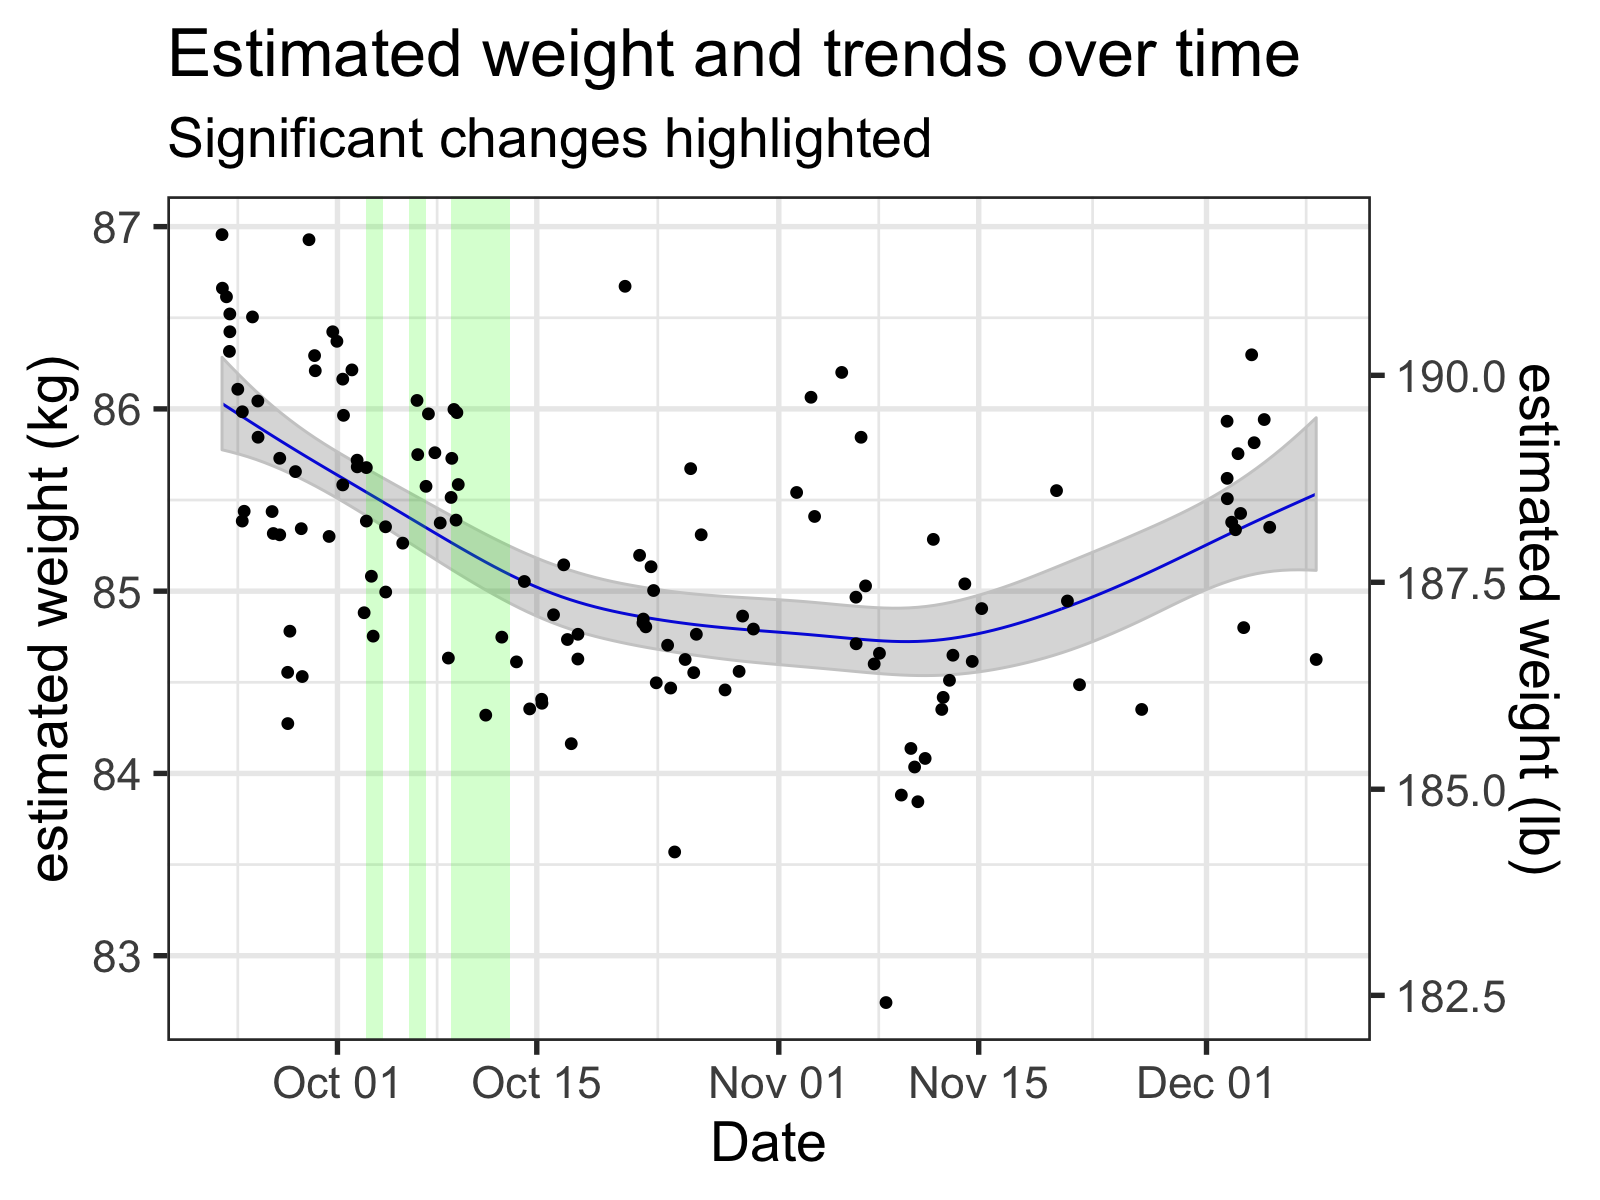 My inferred 'naked' weights, along with the time smooth from the GAM. Regions where this smooth was changing significantly (i.e., where the simultaneous 95% confidence interval of the derivative did not include zero) are highlighted, with green meaning a significant downward trend and red indicating upward.